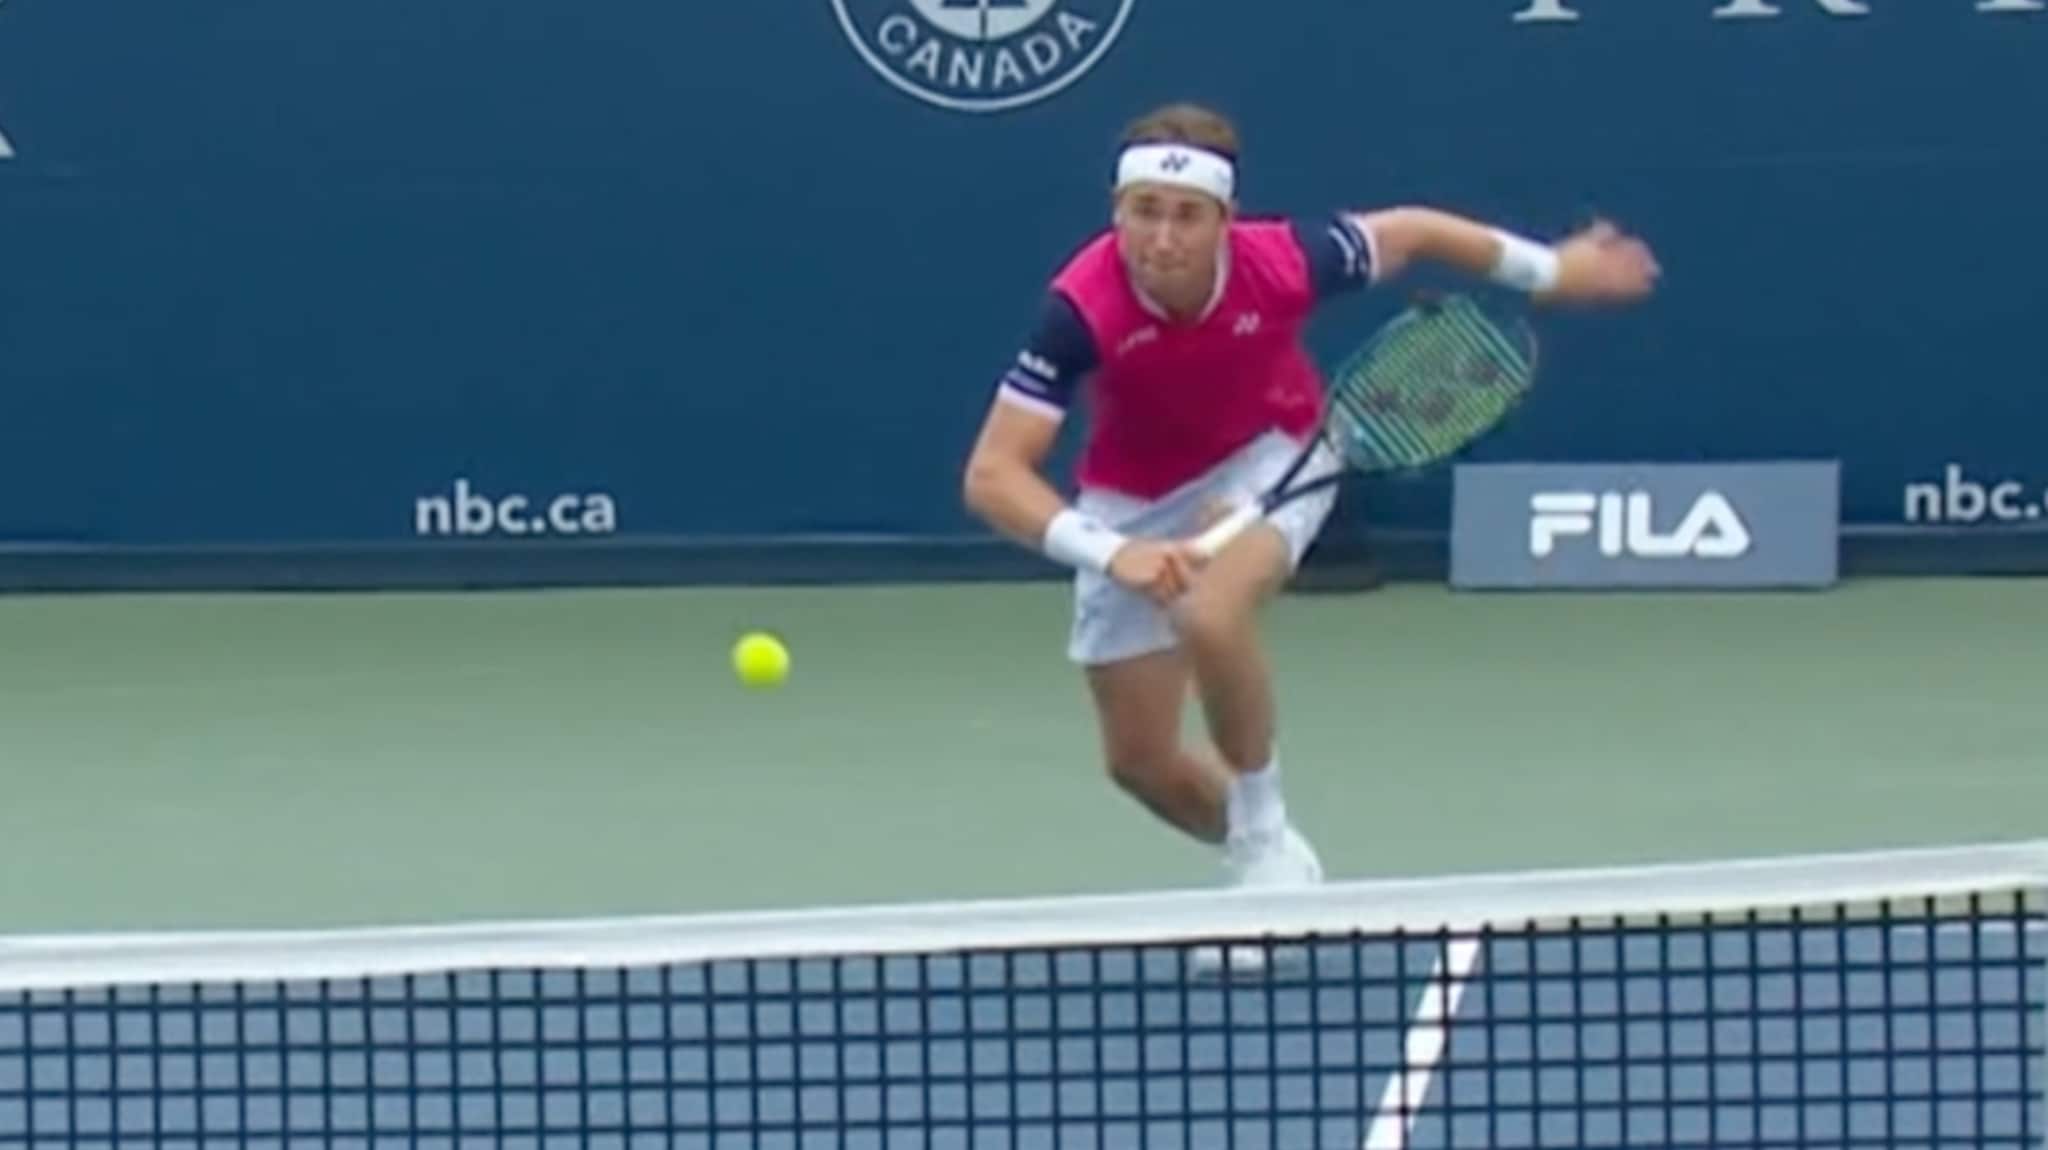 Casper Ruud lost to Alejandro Davidovich Fokina at the Canadian Open – reacted to forearm serve